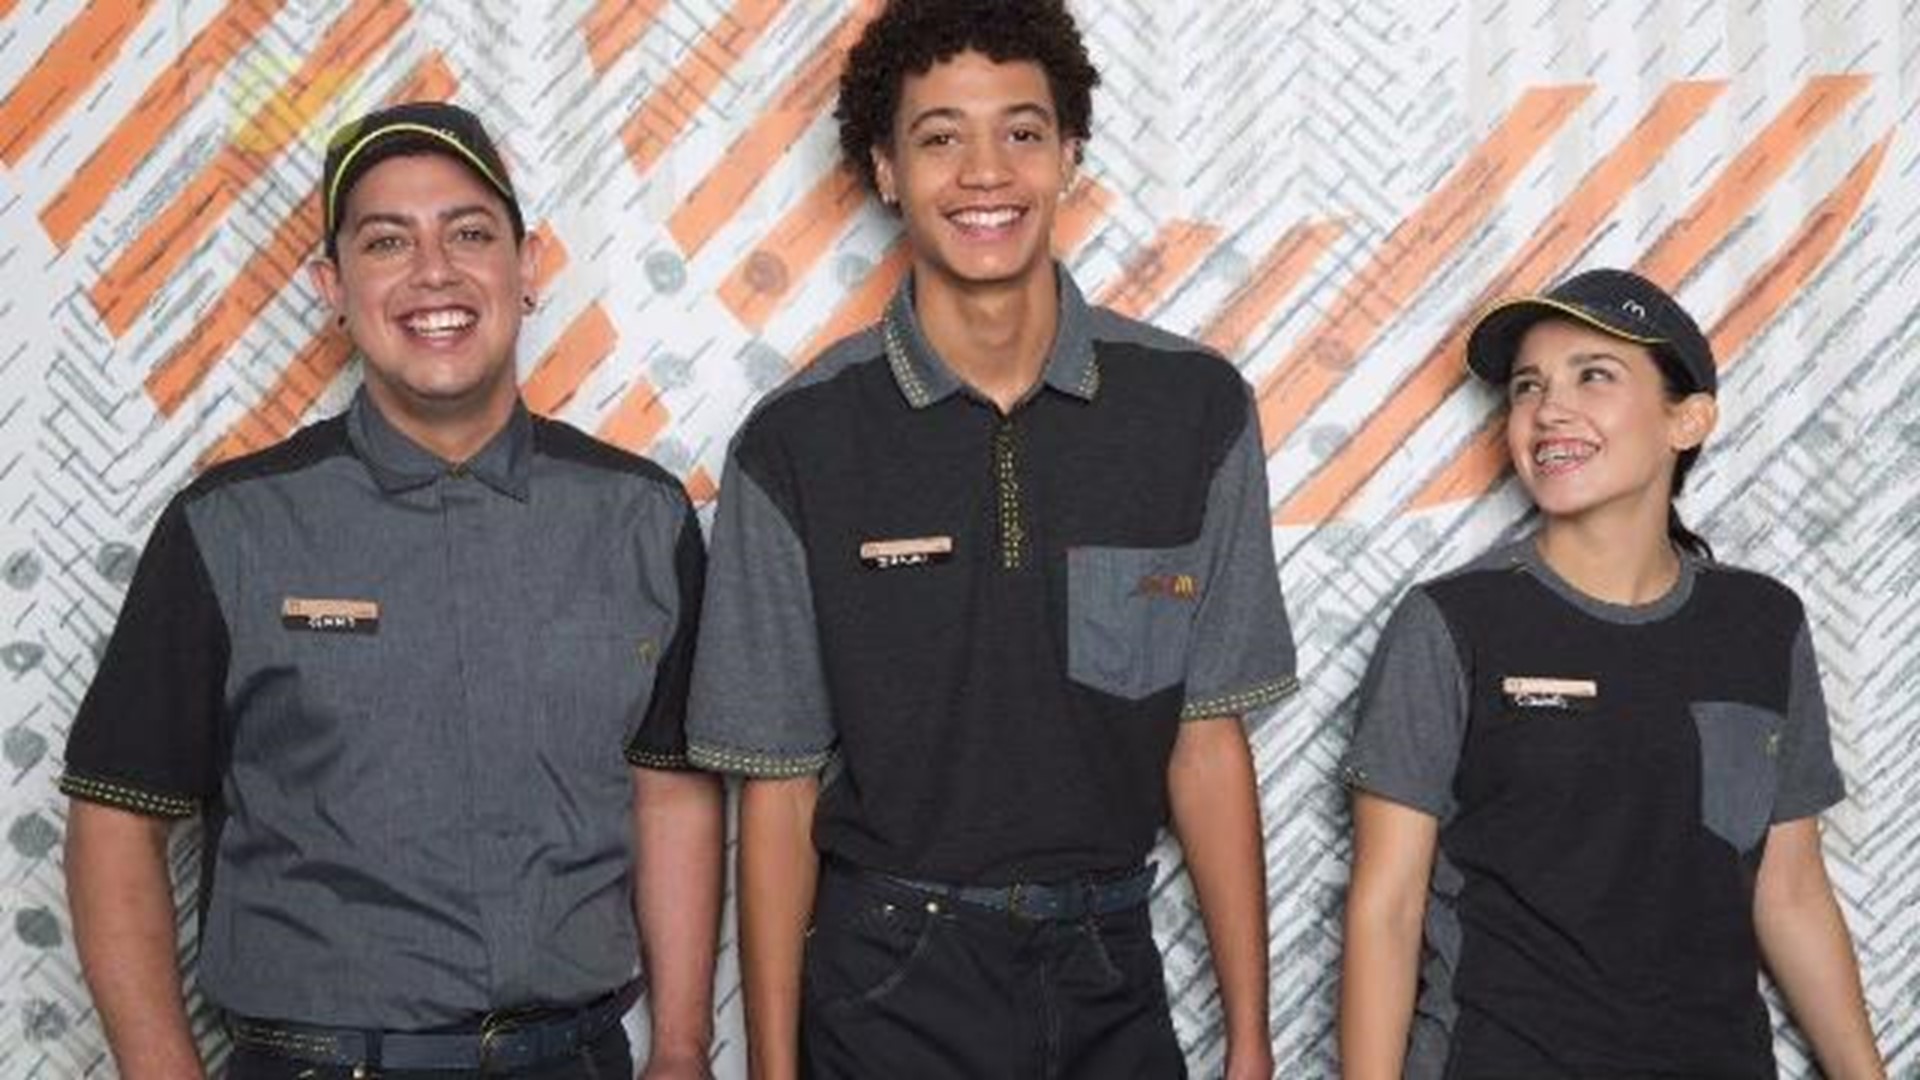 The New Mcdonald S Uniforms What Do You Think